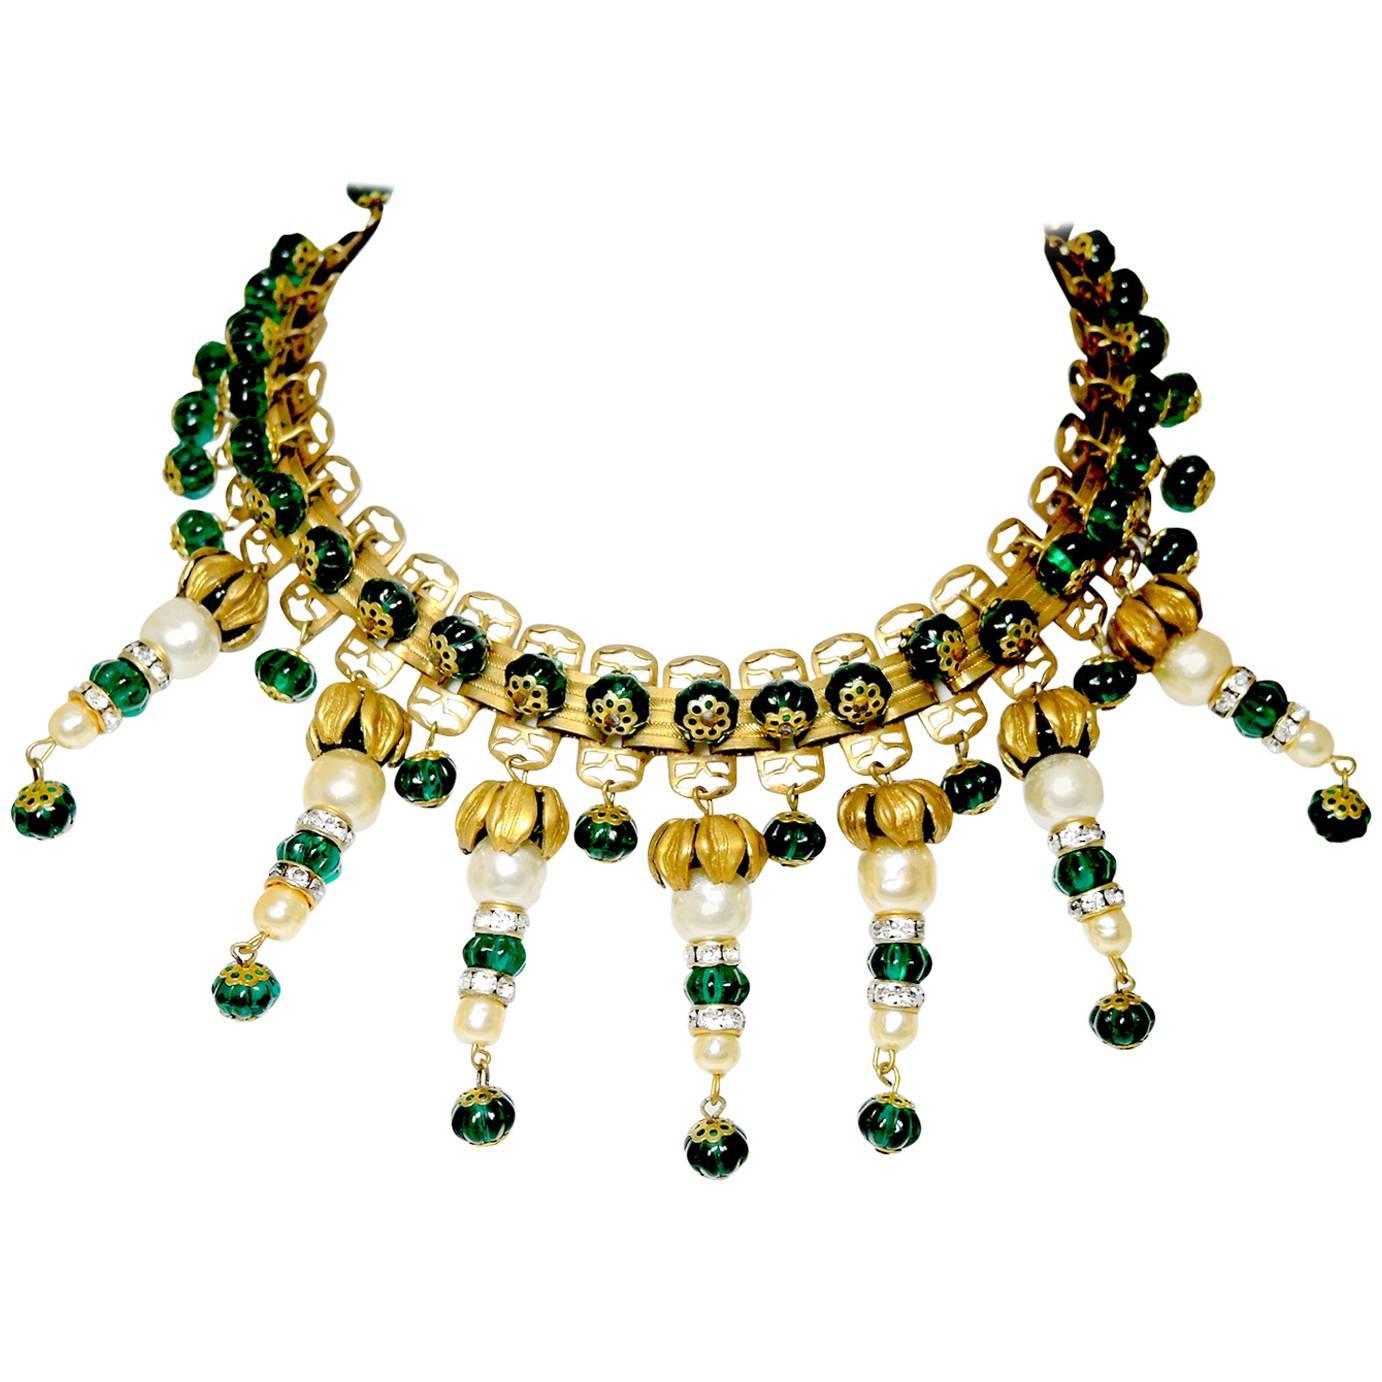 Vintage 1940s French Green Gripoix Choker Necklace For Sale